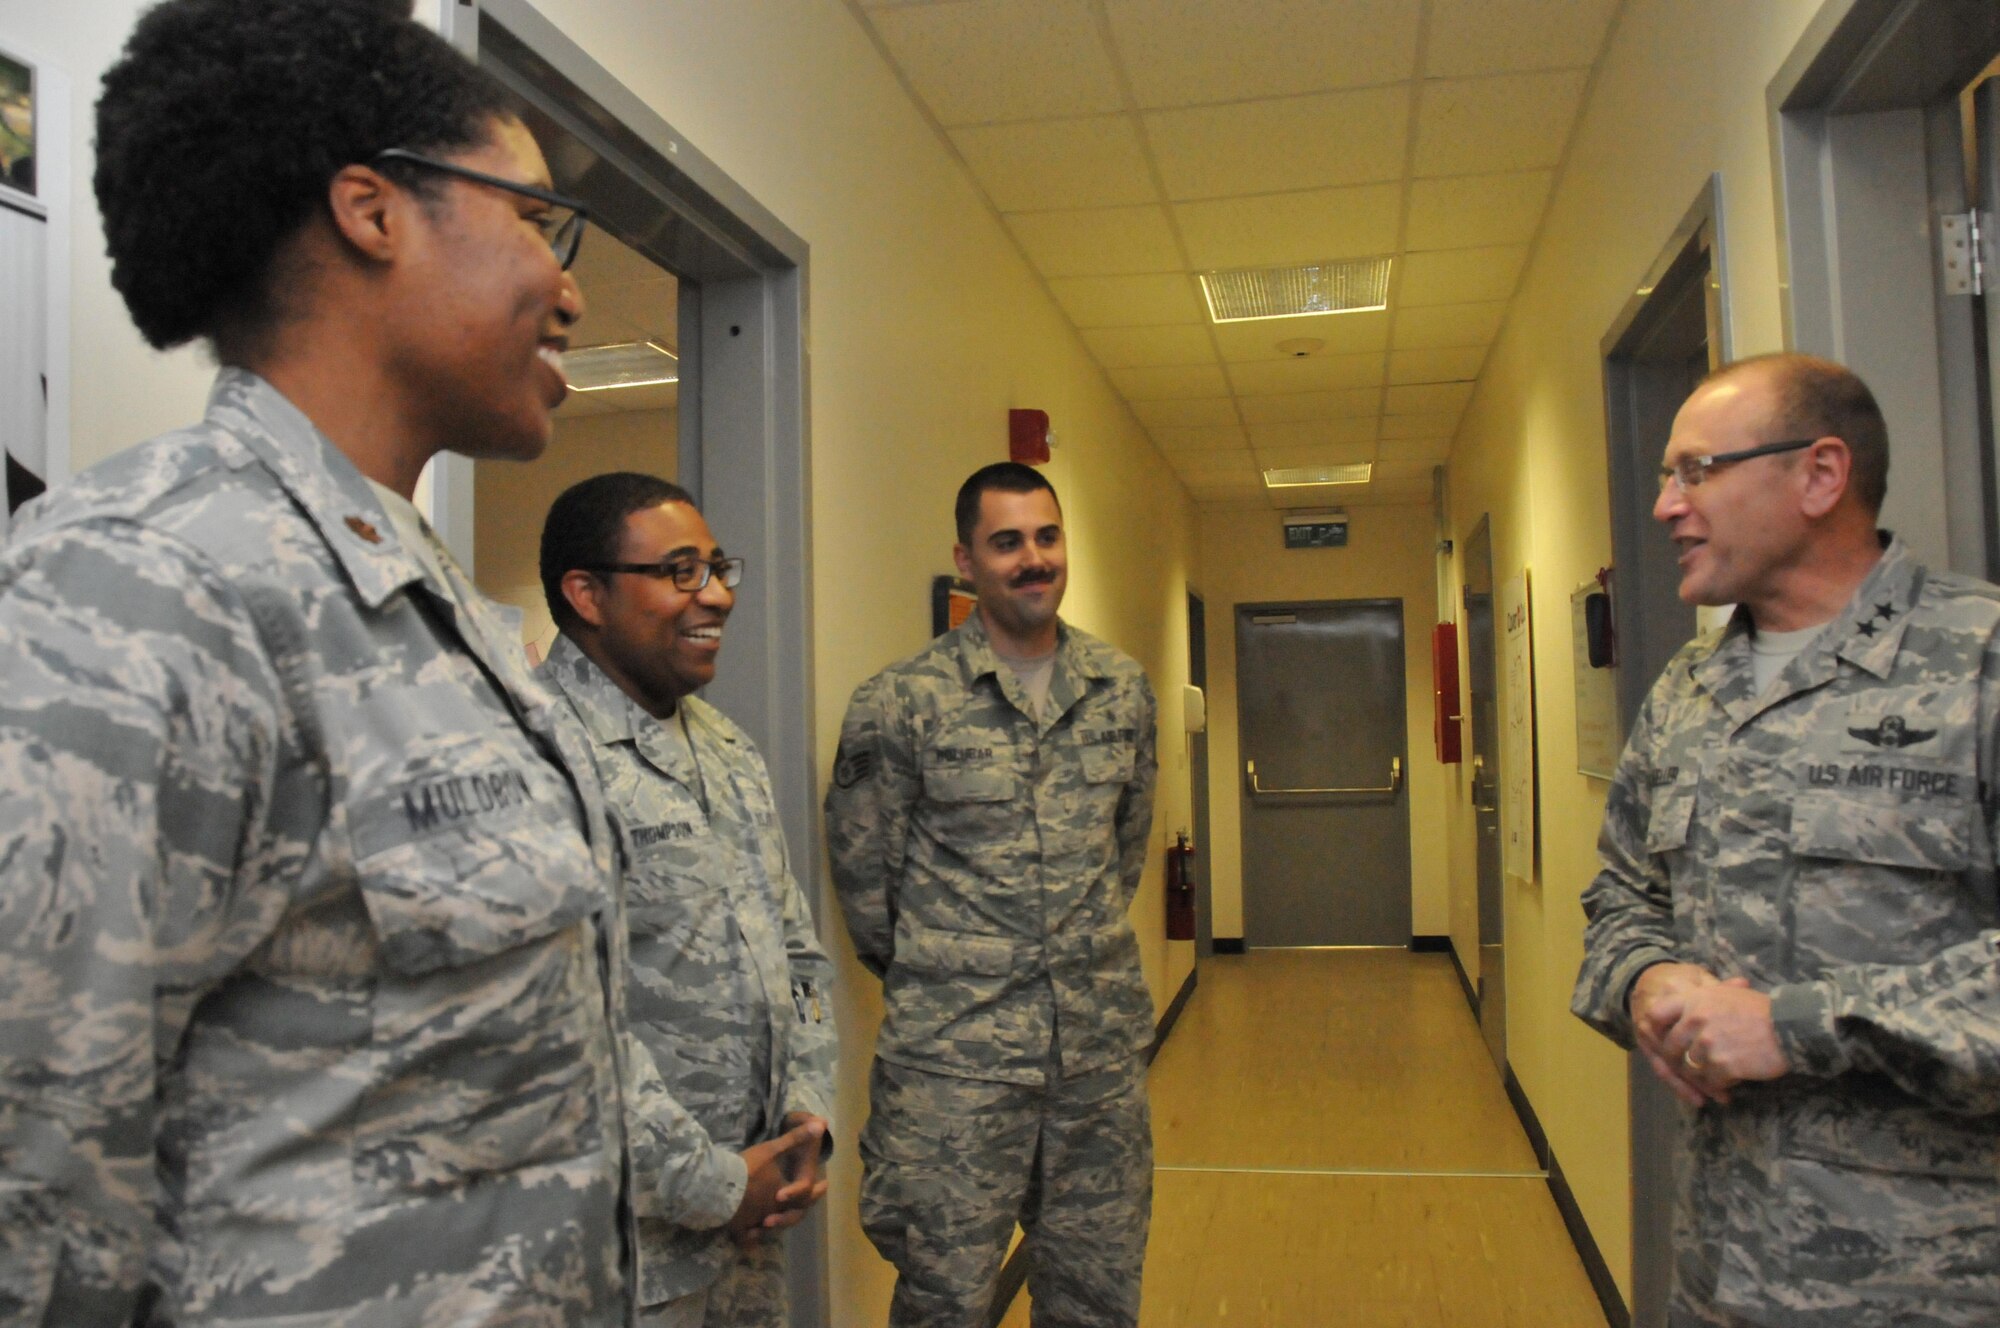 Maj. Gen. Andrew Mueller (right), Air Force Chief of Safety talks to members of the 379th Expeditionary Medical Group public health team, March 16 at Al Udeid Air Base, Qatar. Mueller coined three members of the public health team who won the 379th Air Expeditionary Wing’s Occupational Safety Award in February. (U.S. Air Force photo by Tech. Sgt. Terrica Y. Jones/Released)